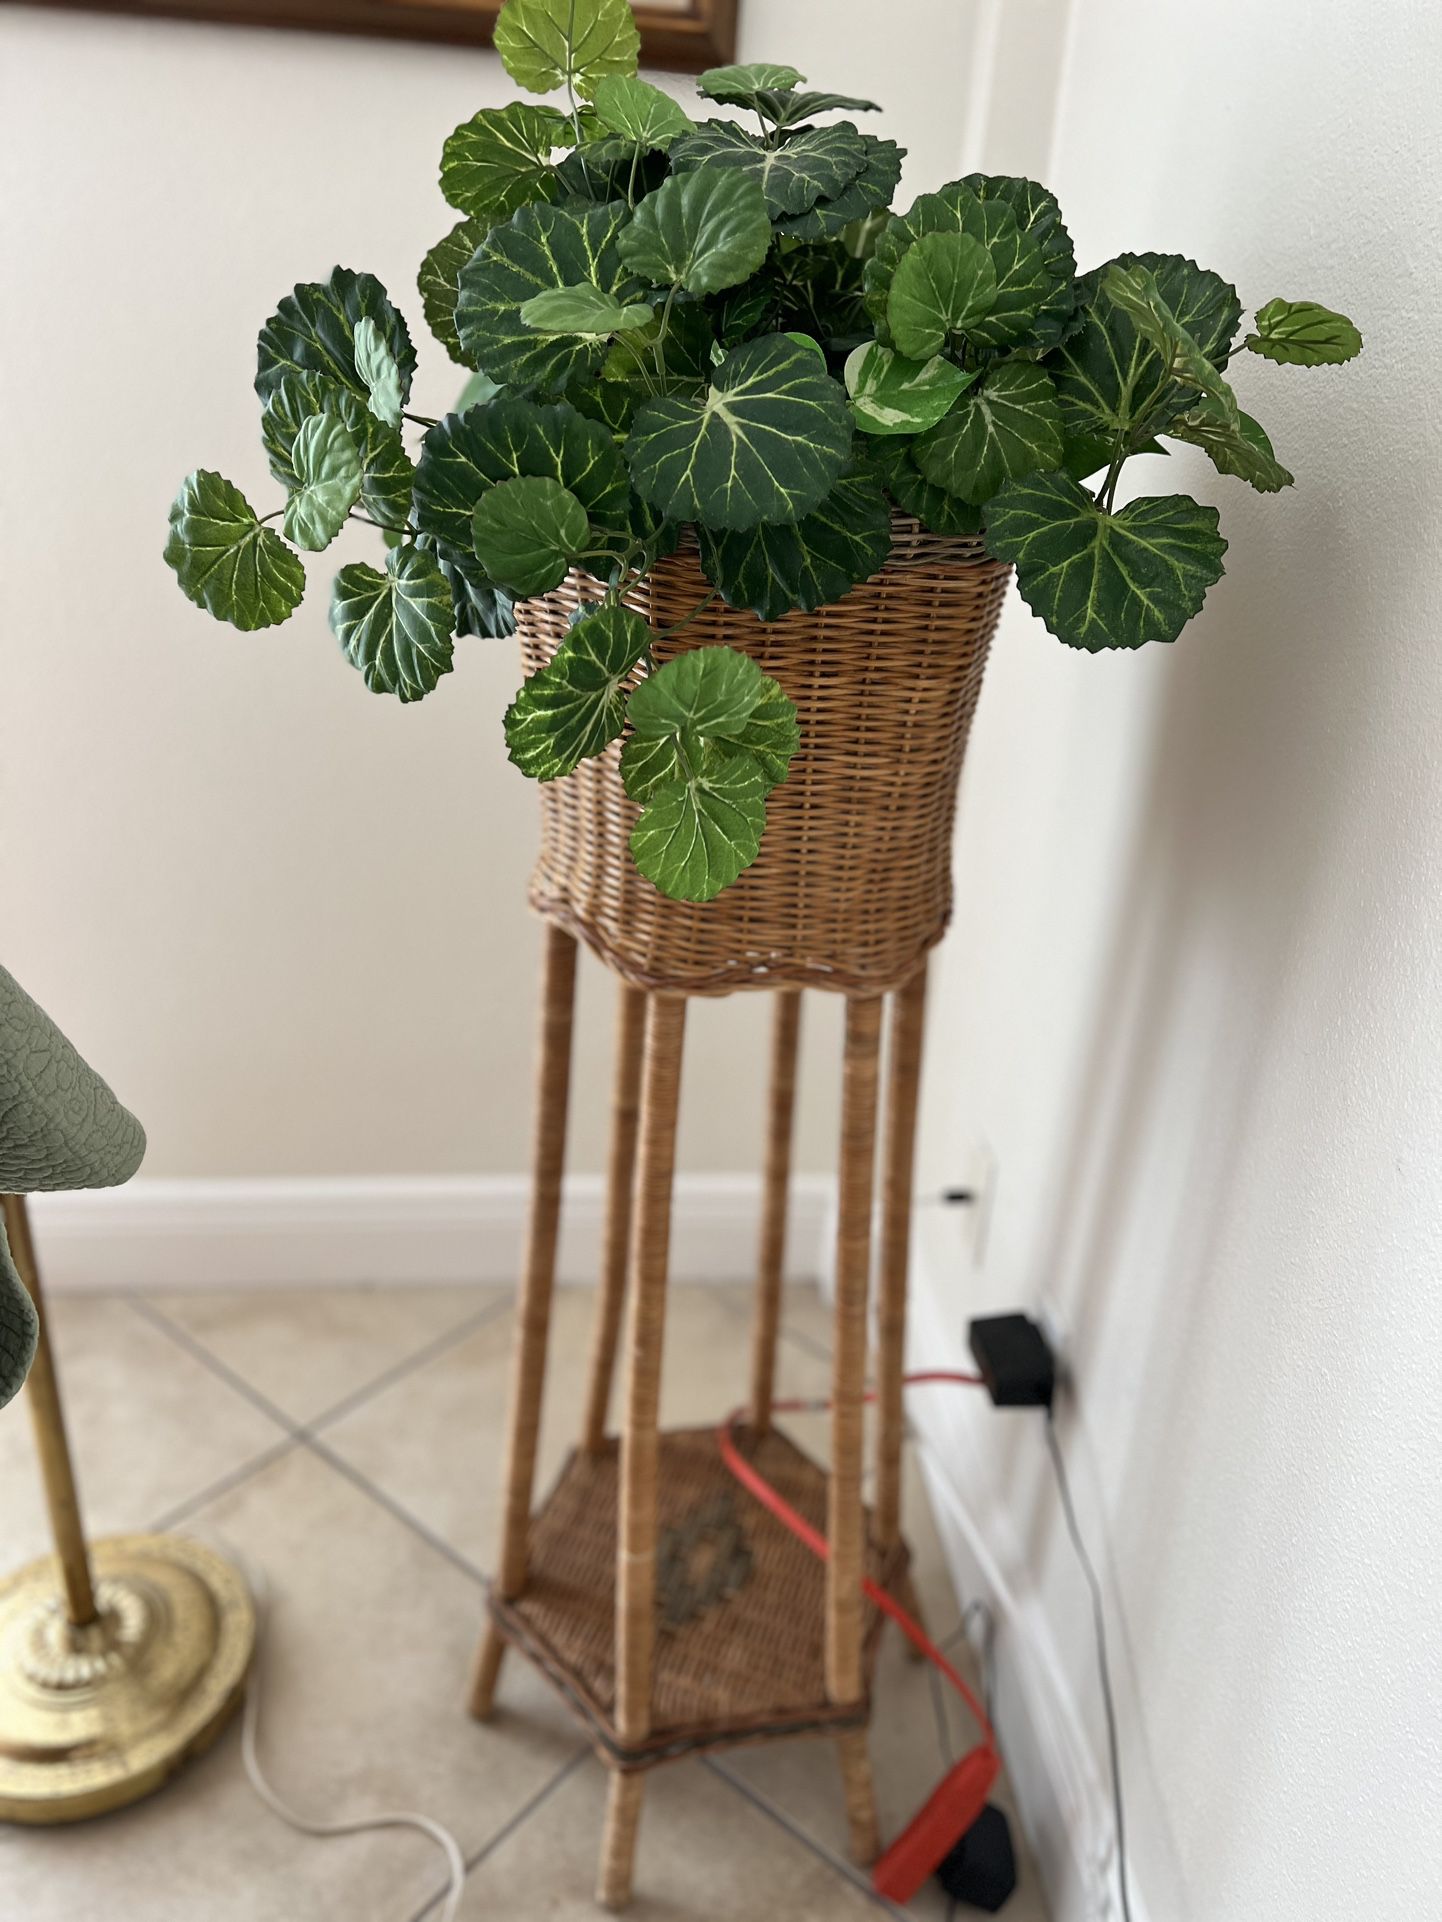 Plant Stand; Wicker.  